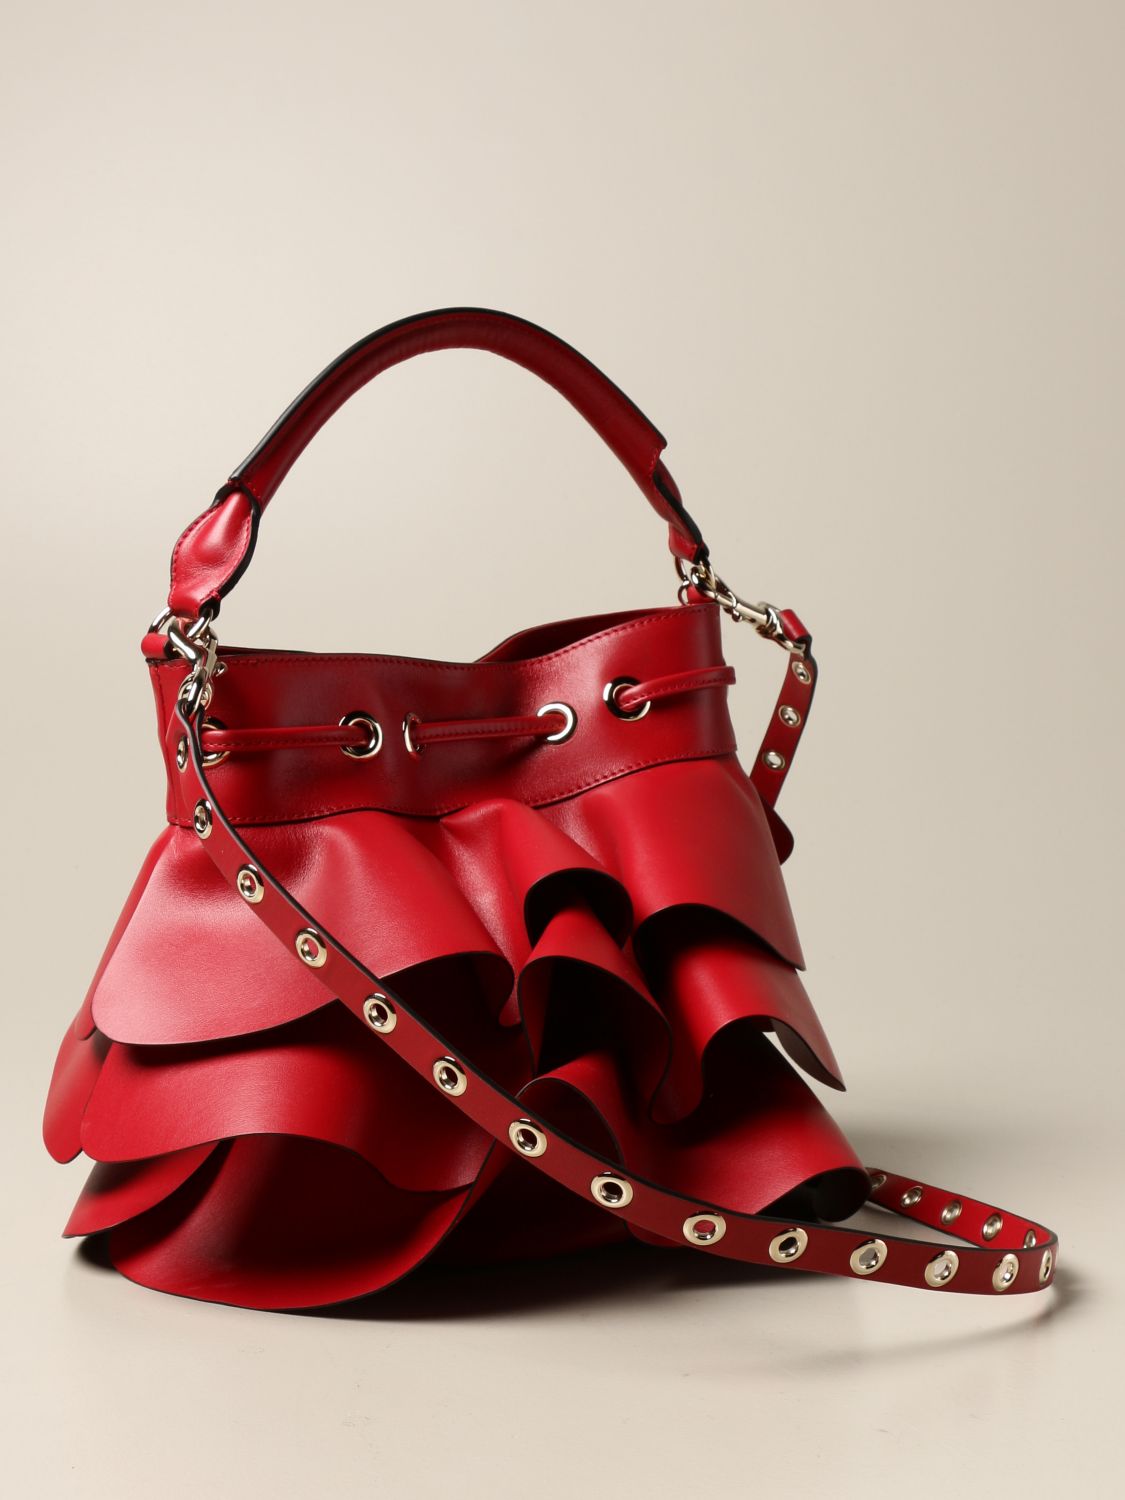 RED Valentino, Bags, Red Valentino Rock Ruffles Nude Bag W Chain Ruffled  Edge And Flap Top